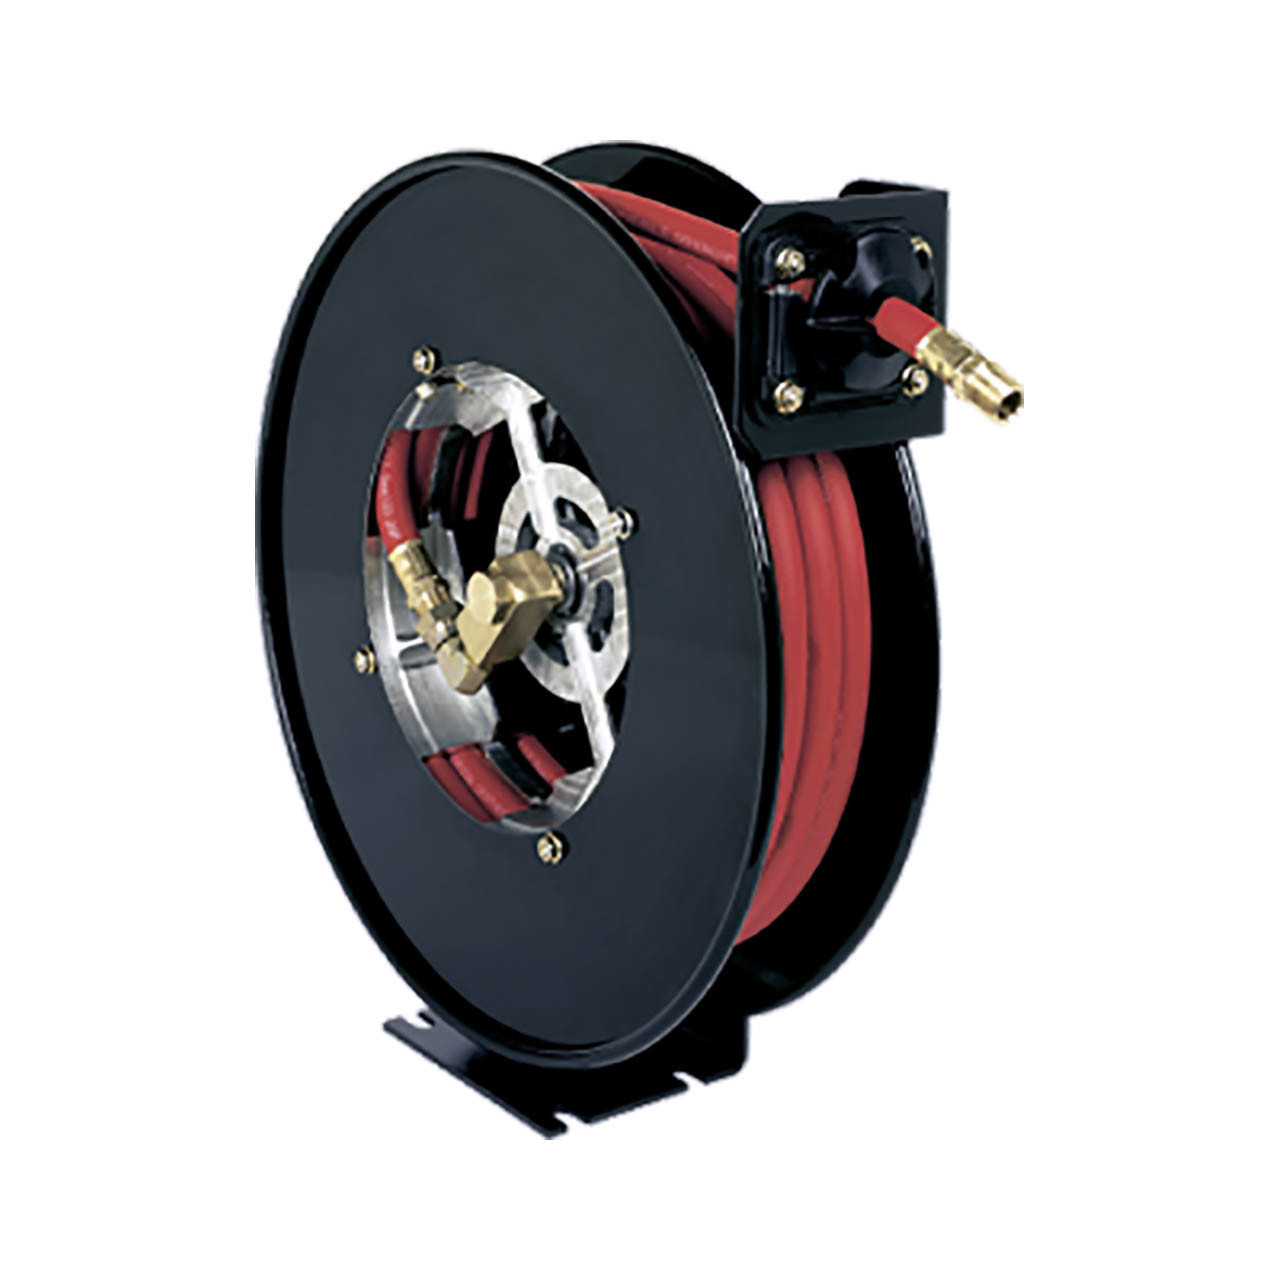 Hosetract Unitract™ Low Pressure Air/Water Hose Reel, Reel & Hose, 1/2 in.  x 50 ft., 300 PSI